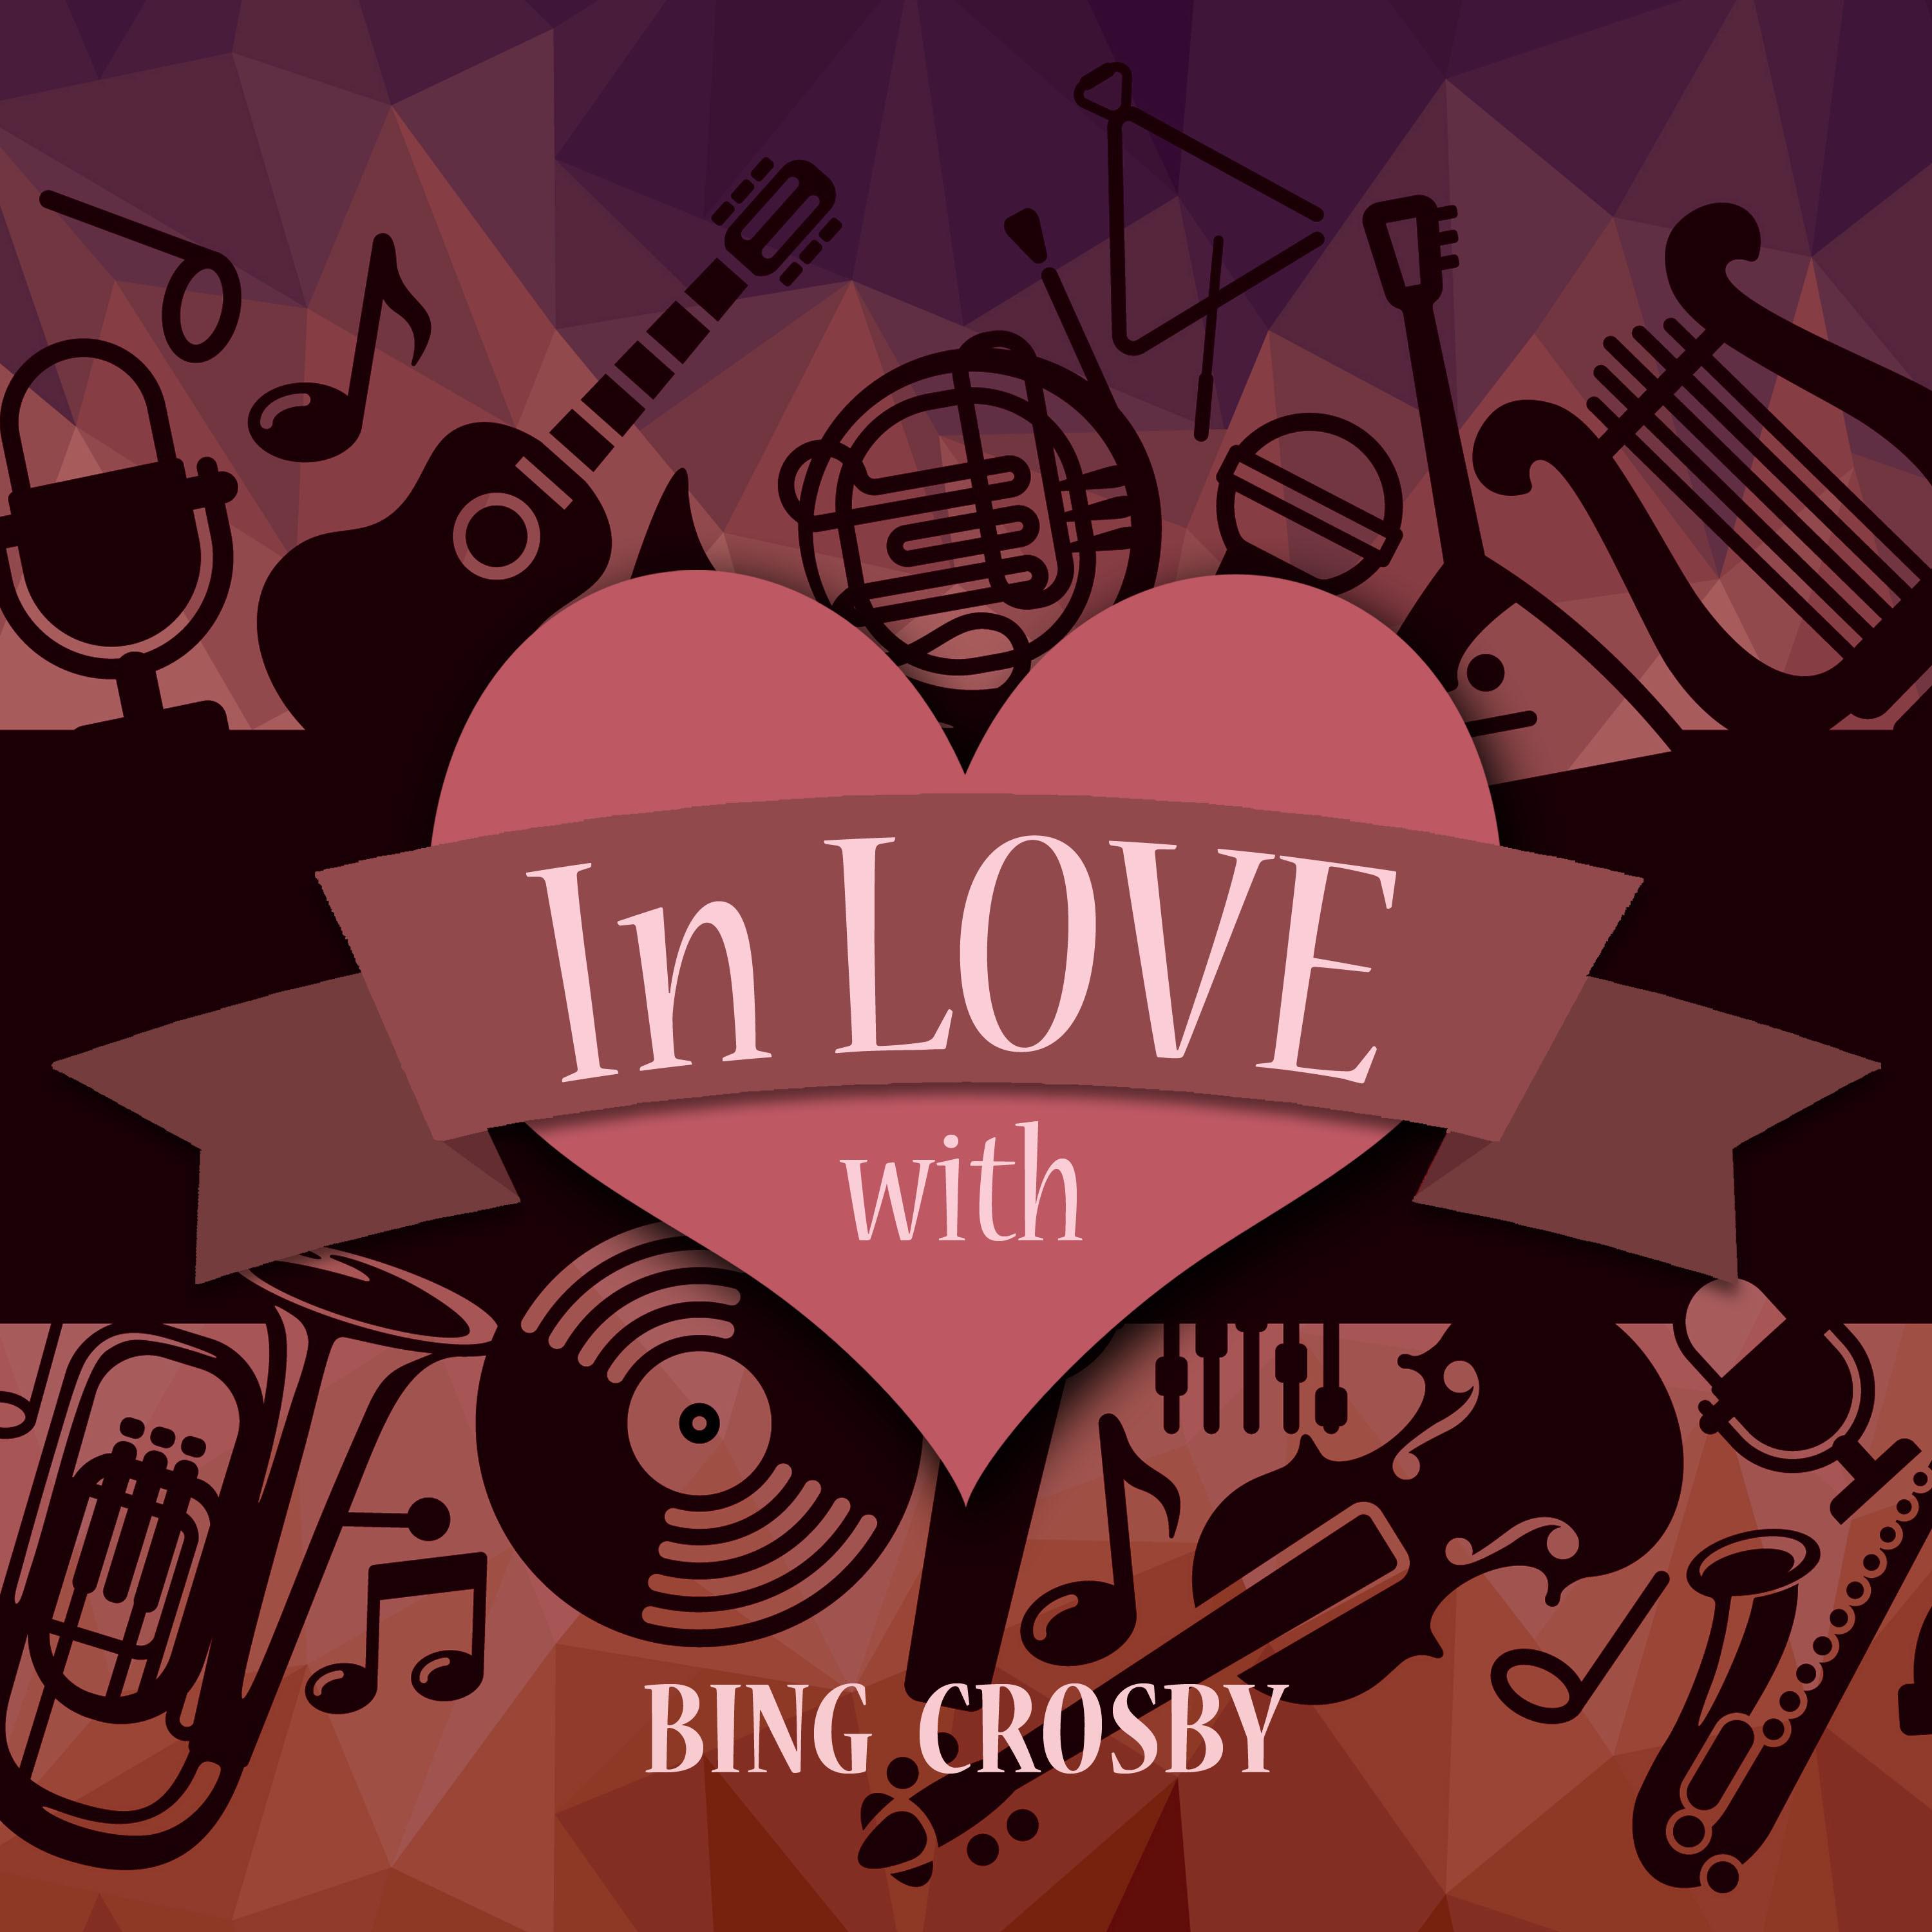 In Love with Bing Crosby